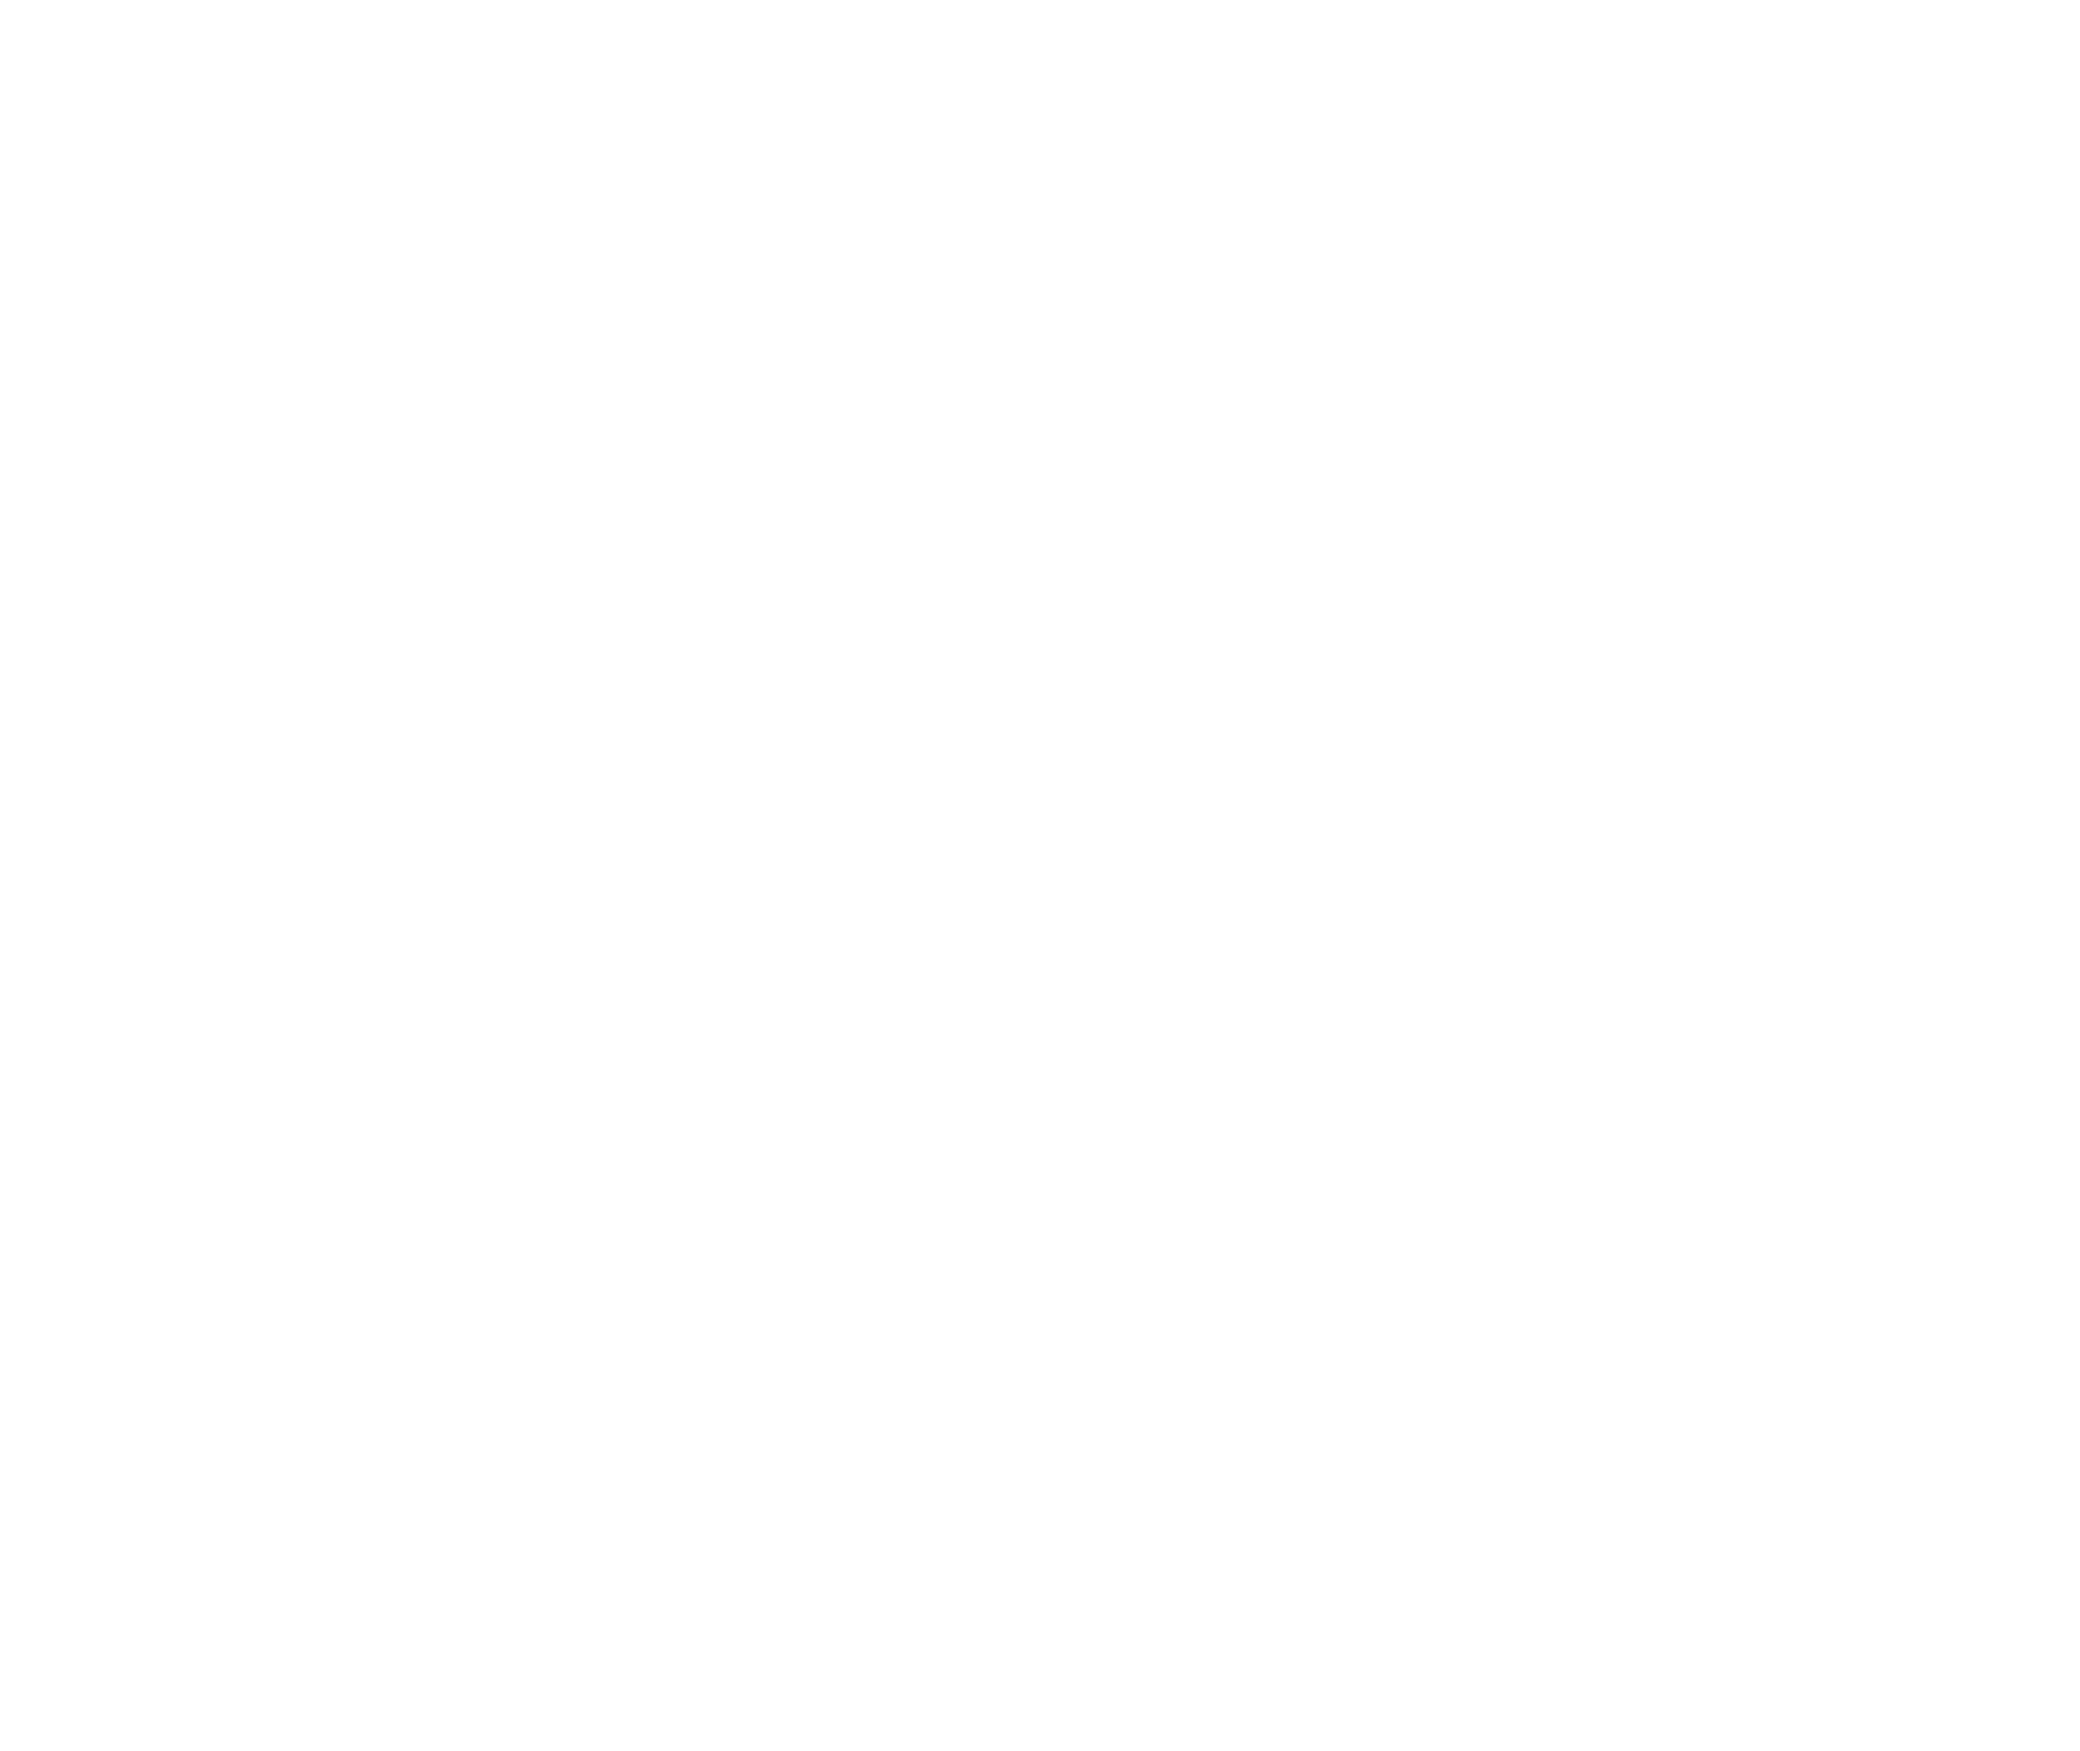 FCC Seals and Logos | Federal Communications Commission